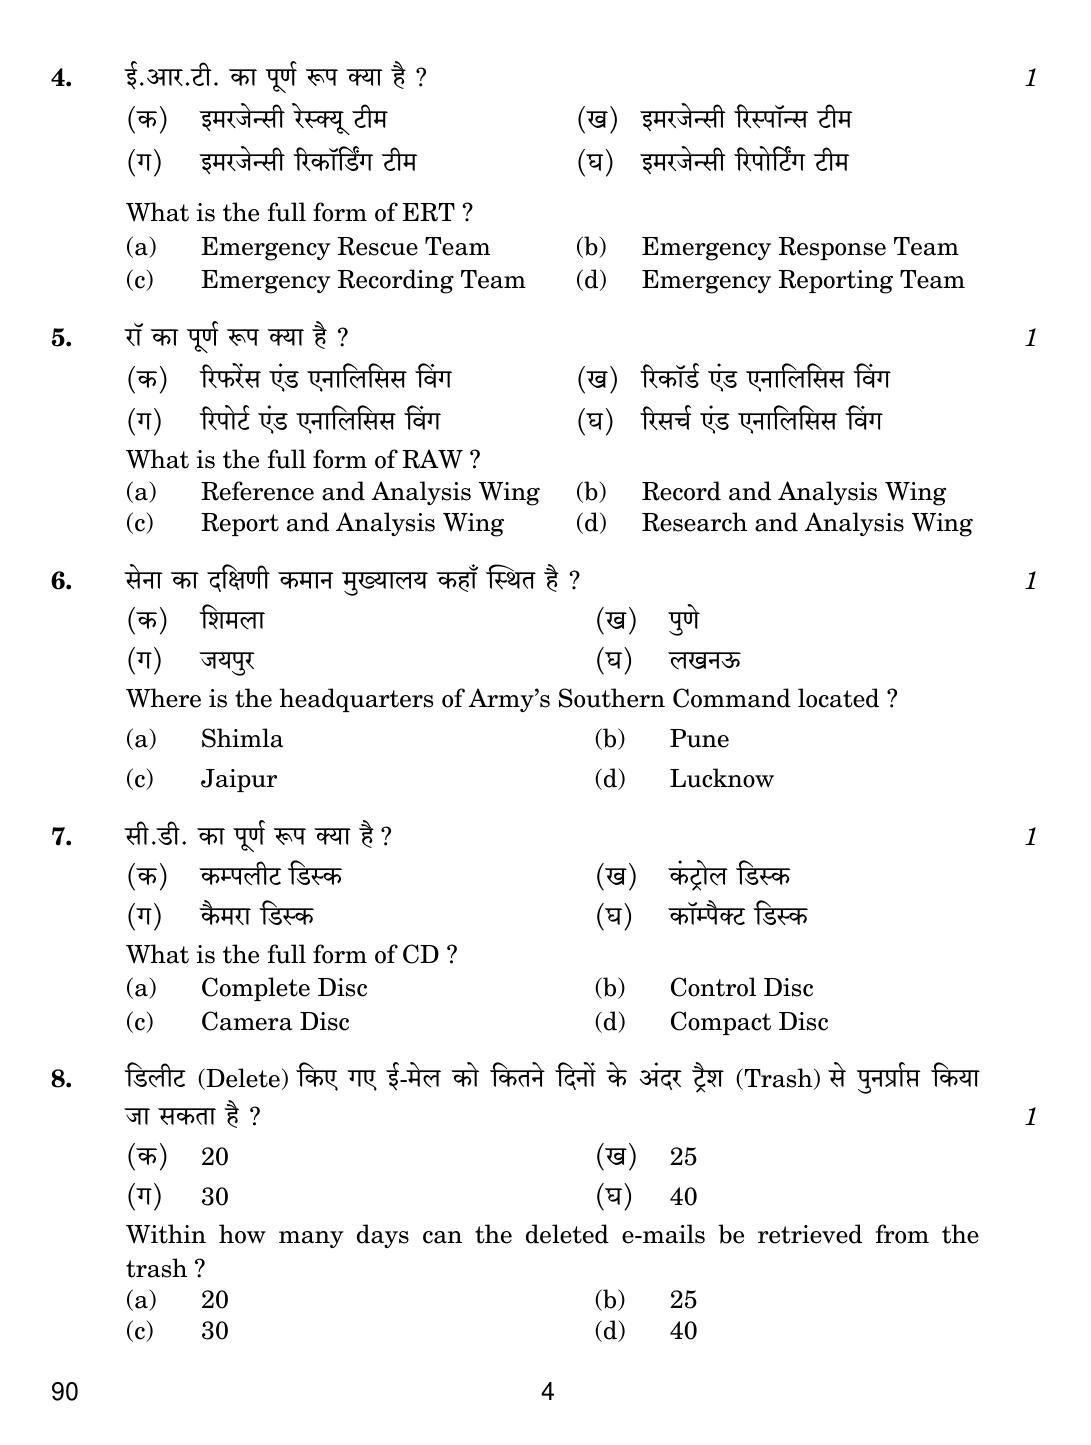 CBSE Class 10 90 SECURITY 2019 Question Paper - Page 4